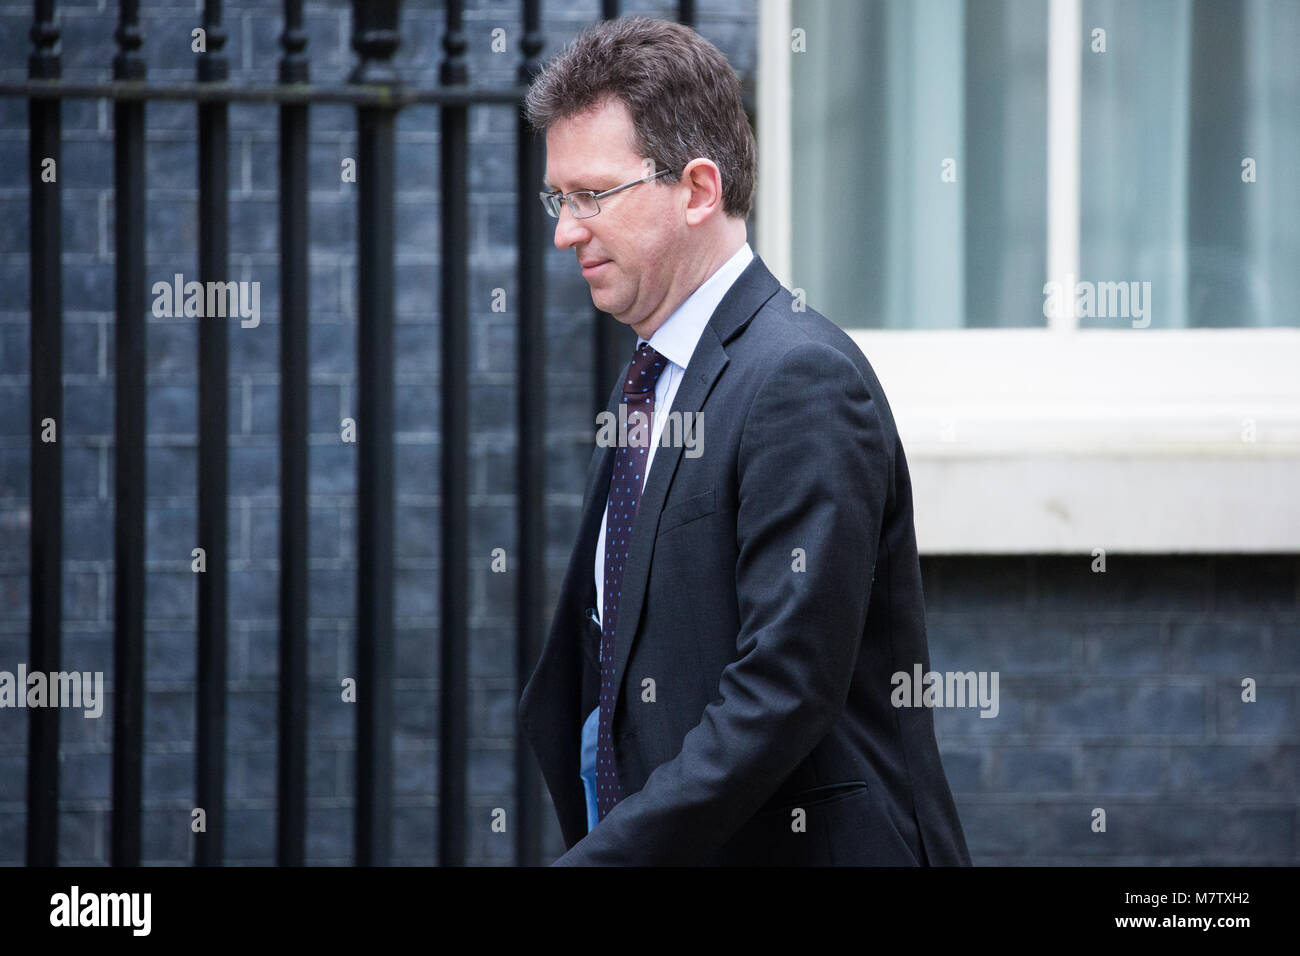 London, UK. 13th March, 2018. Jeremy Wright QC MP, Attorney General, arrives at 10 Downing Street for a Cabinet meeting. Subjects to be discussed are expected to include the chemical weapons attack in Salisbury. Credit: Mark Kerrison/Alamy Live News Stock Photo